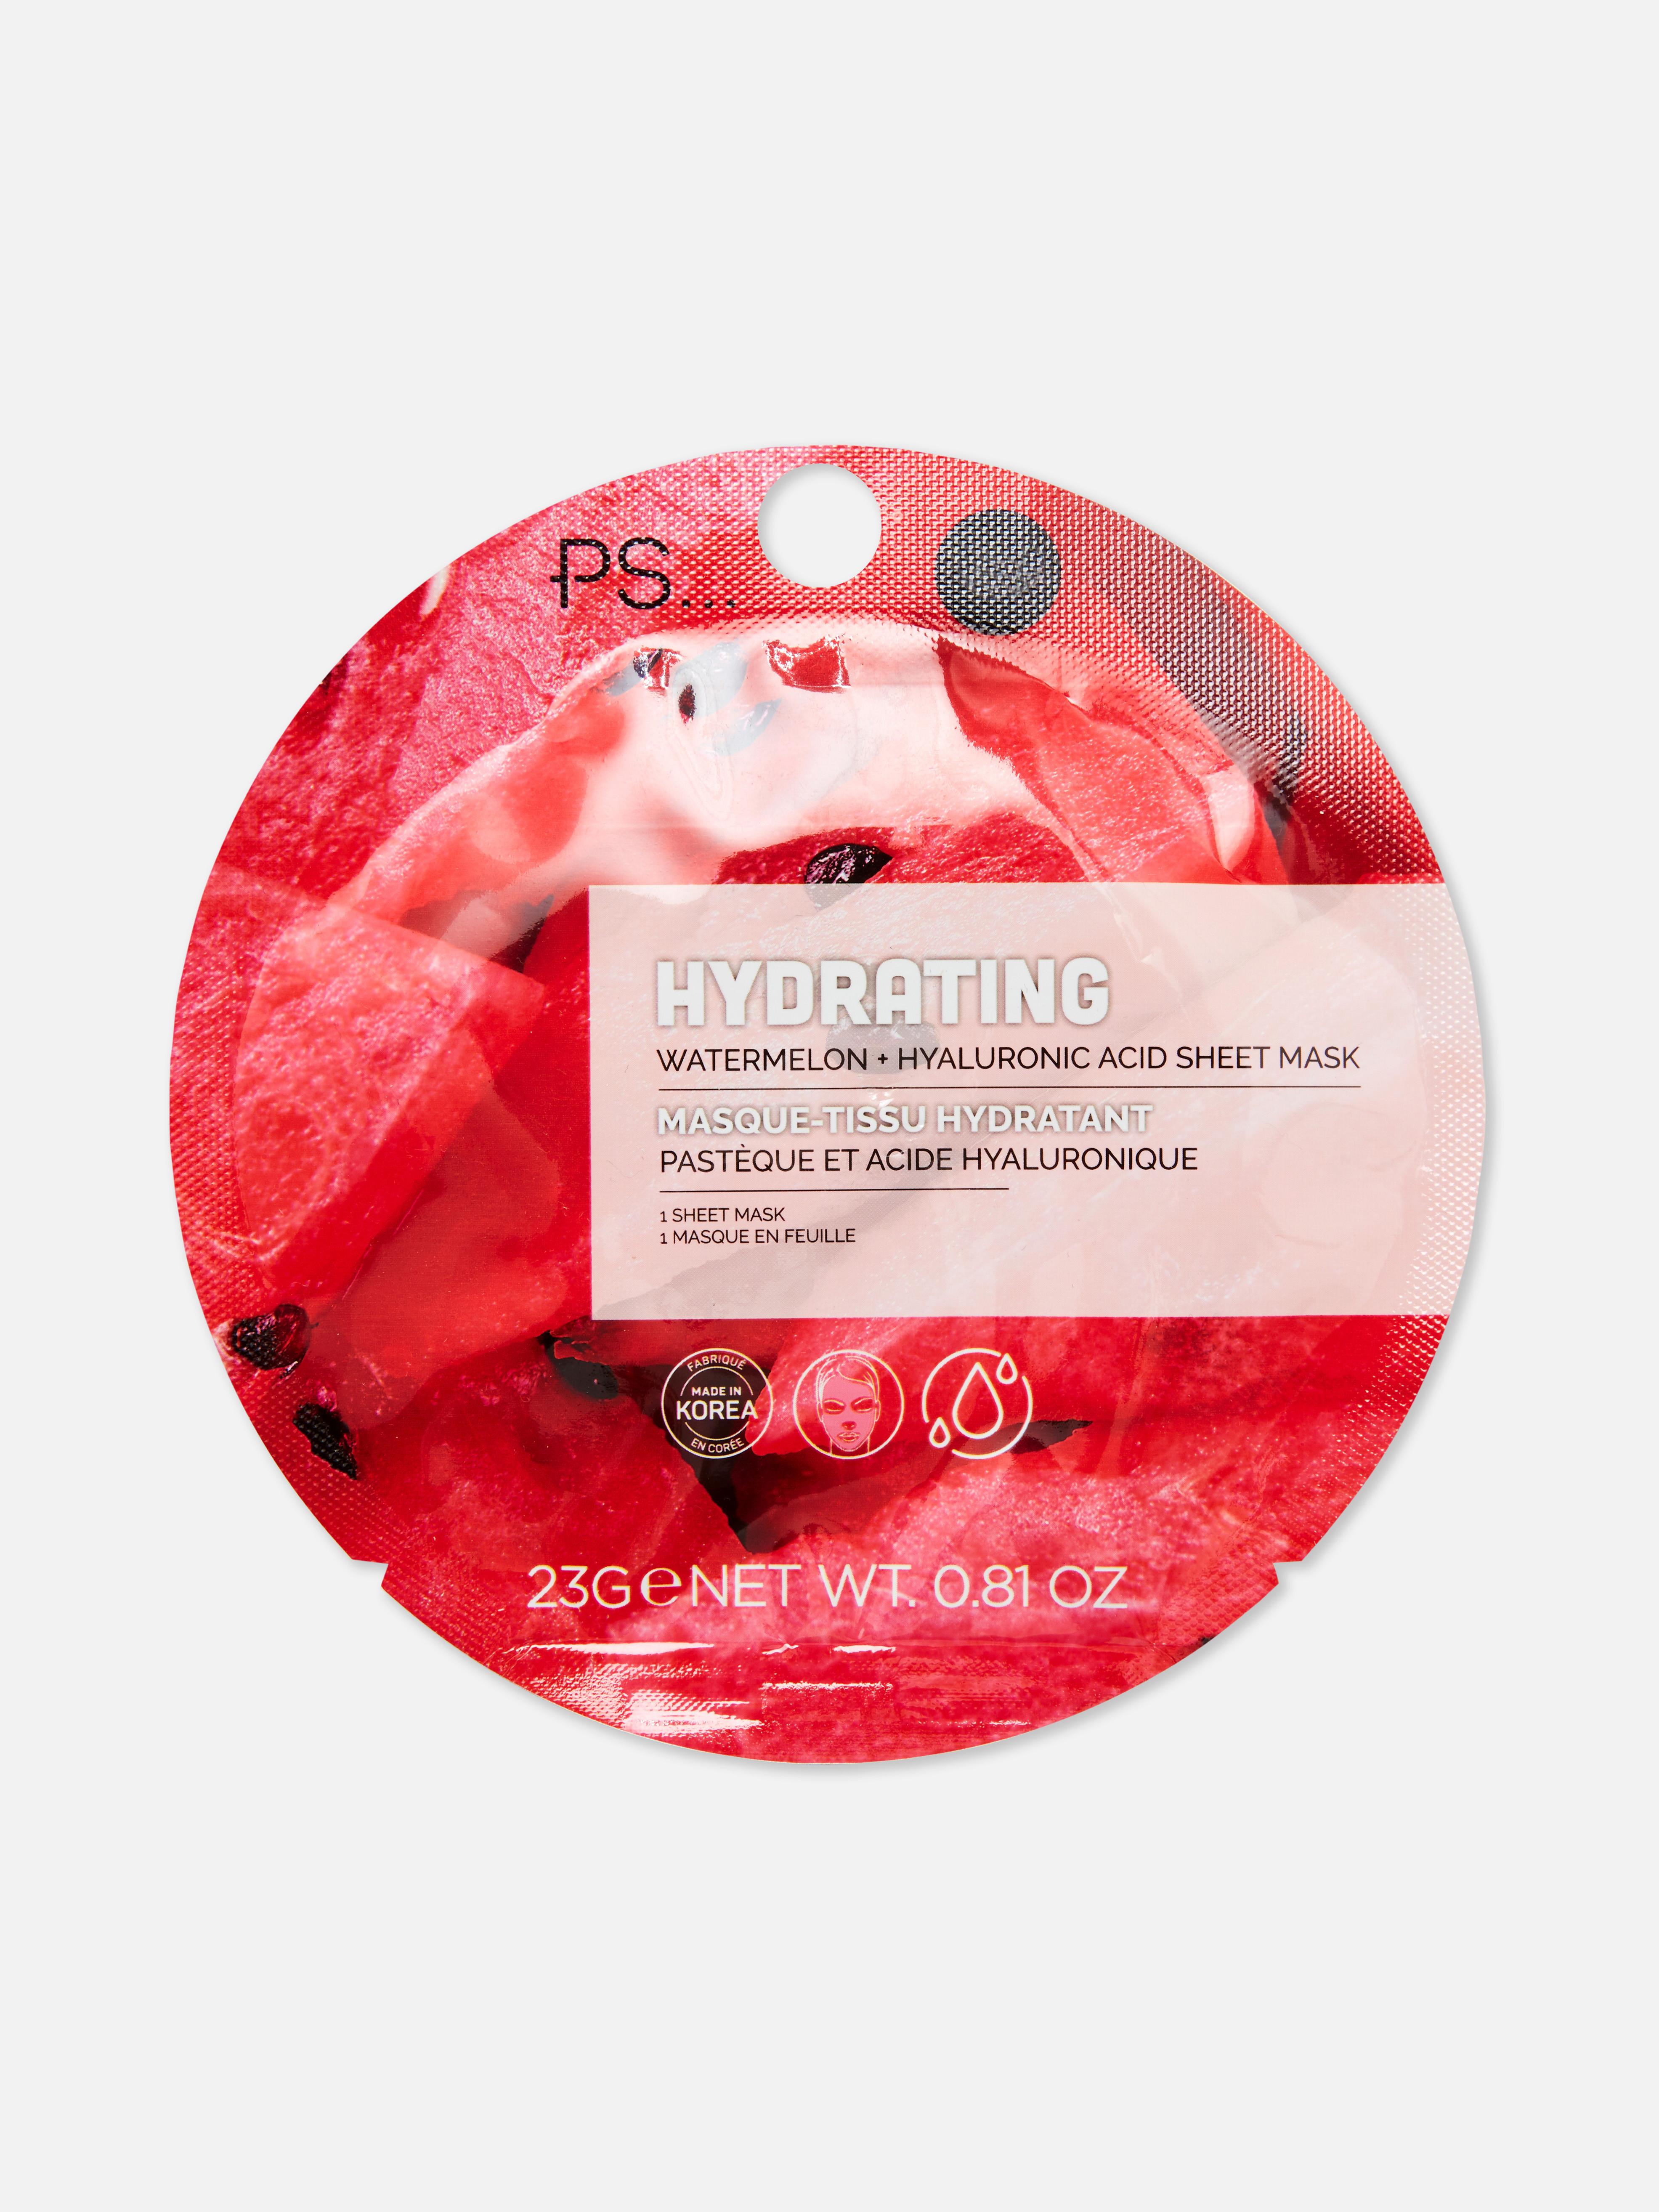 Watermelon and Hyaluronic Acid Sheet Mask